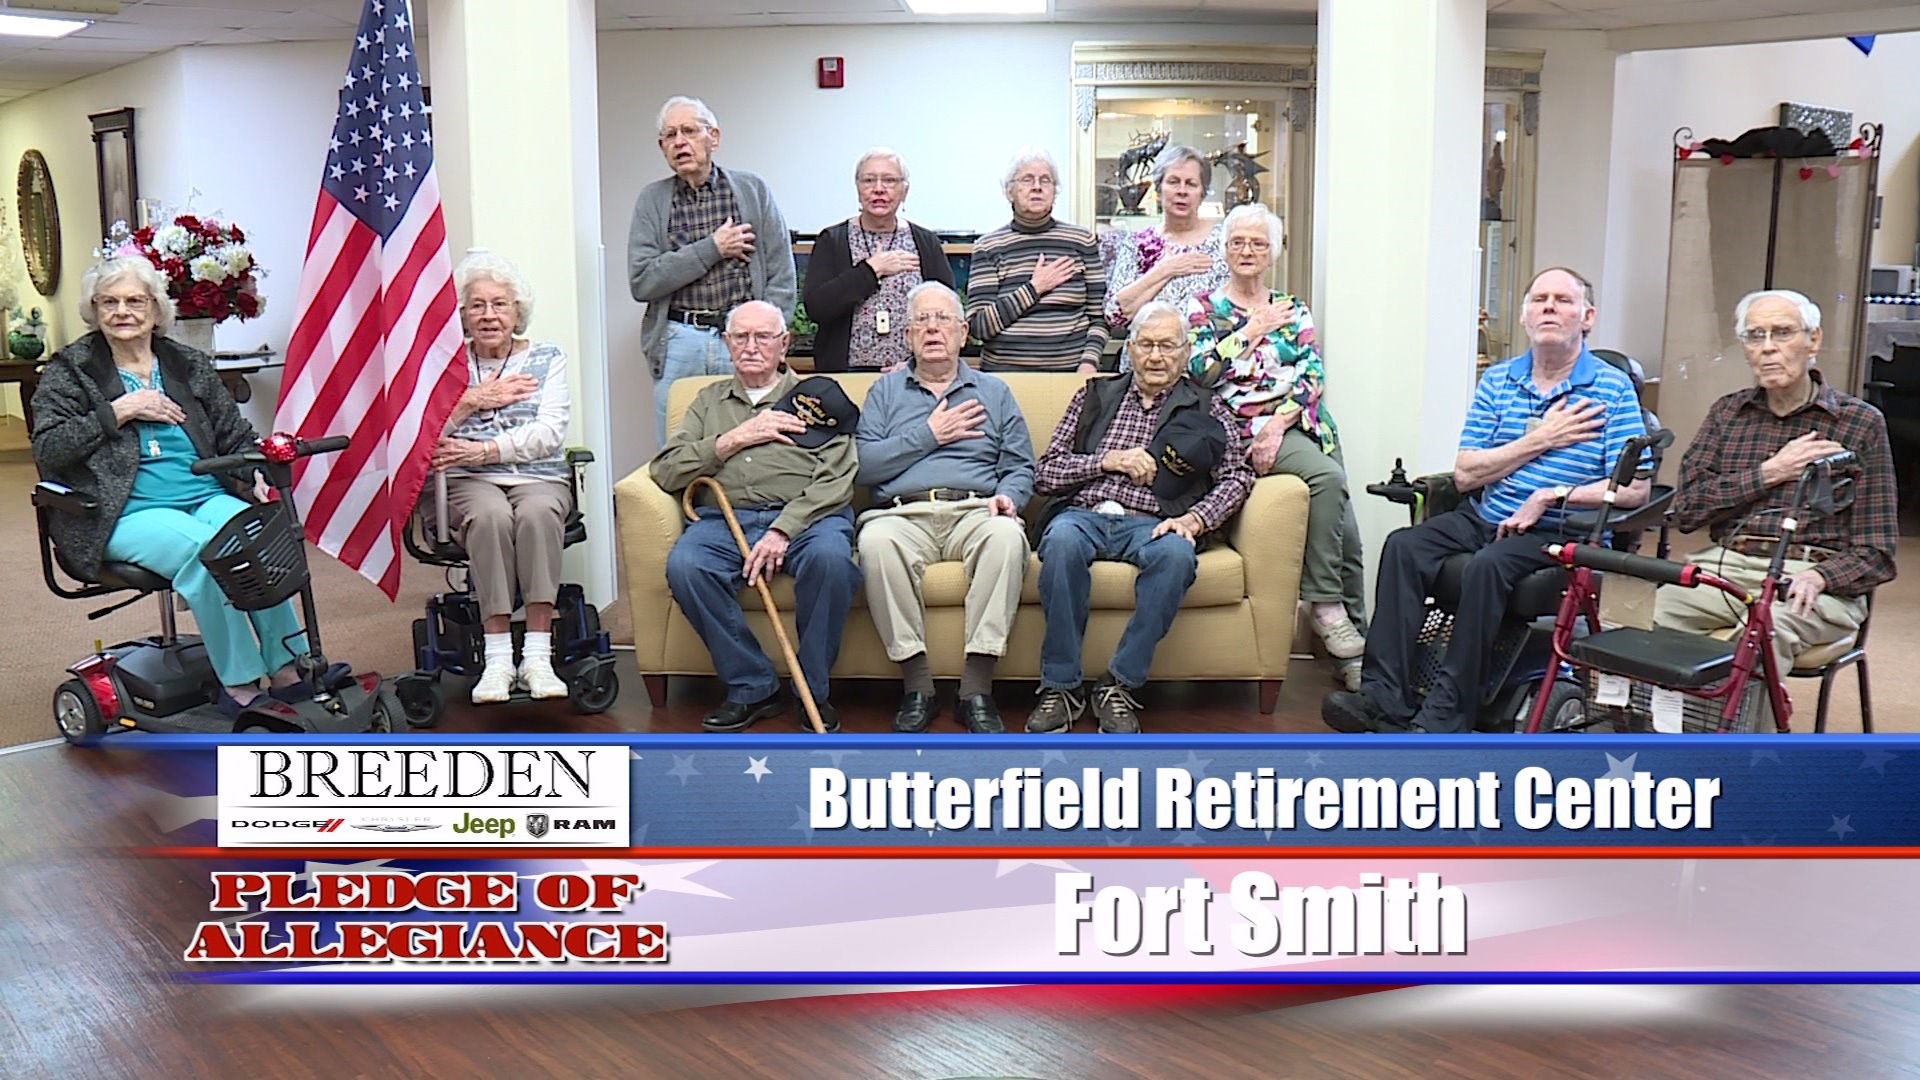 Butterfield Retirement Center  Fort Smith